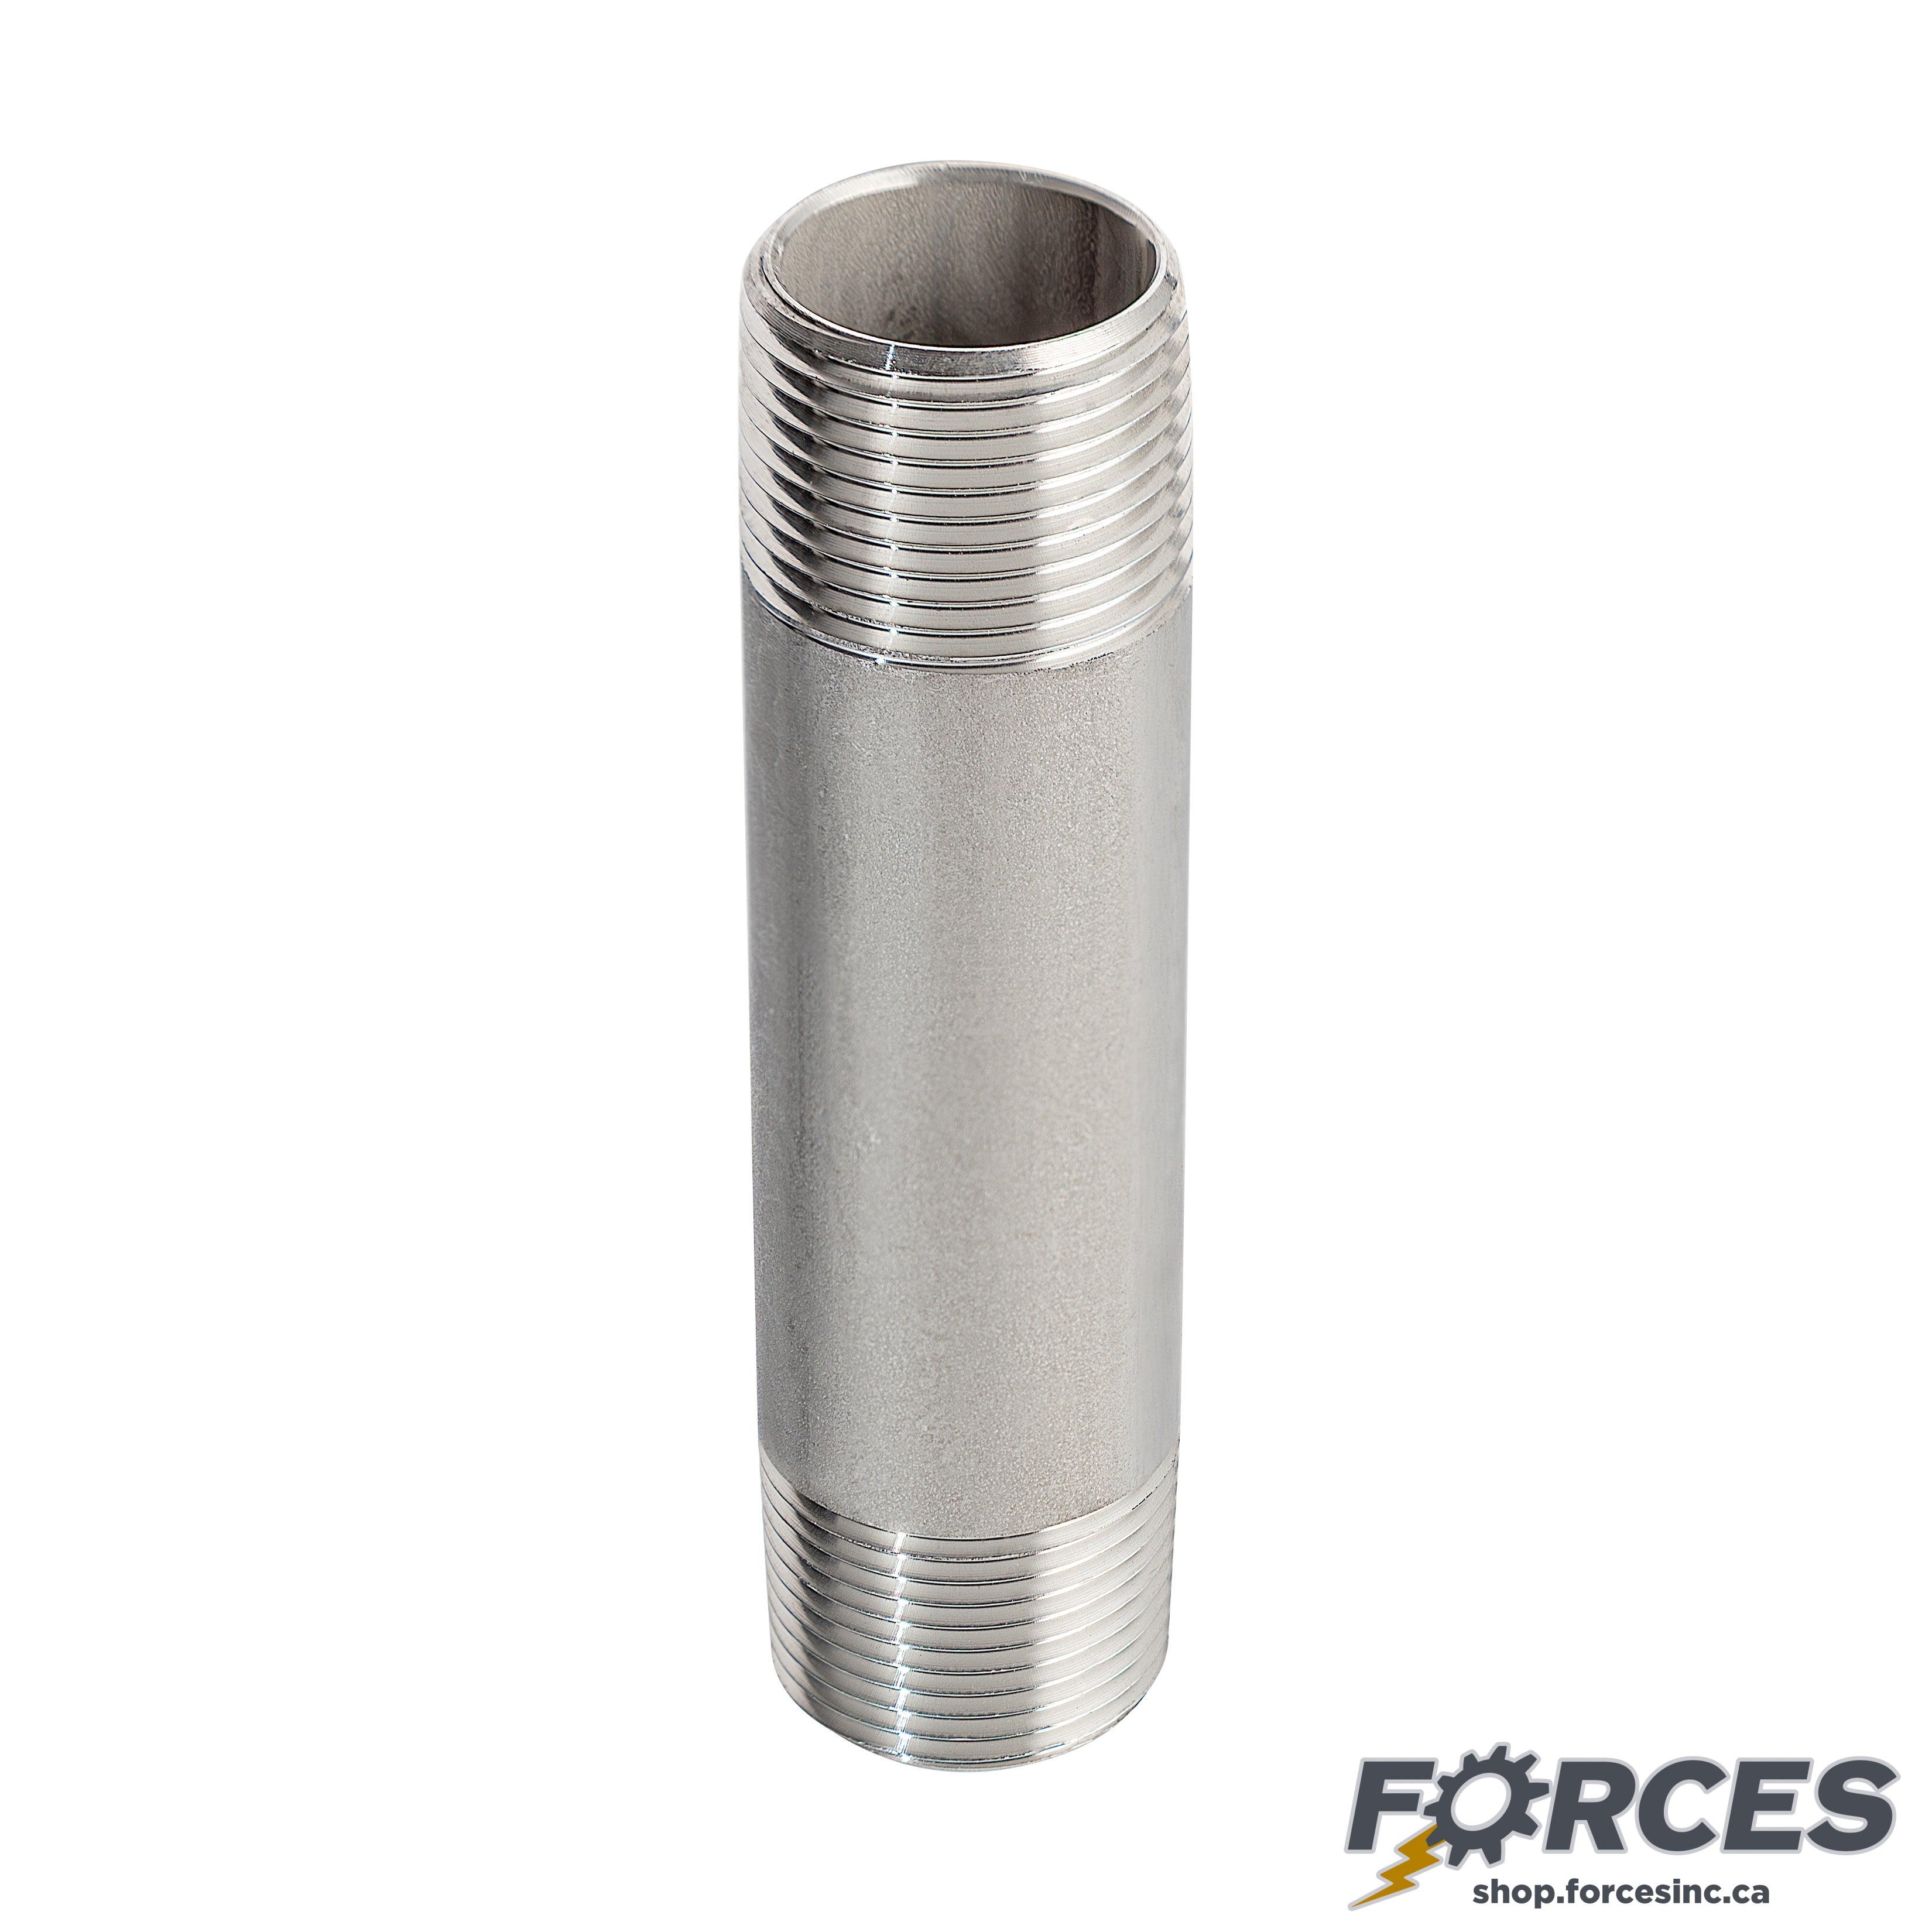 3" X 4" Long Nipple - Stainless Steel 316 - Forces Inc